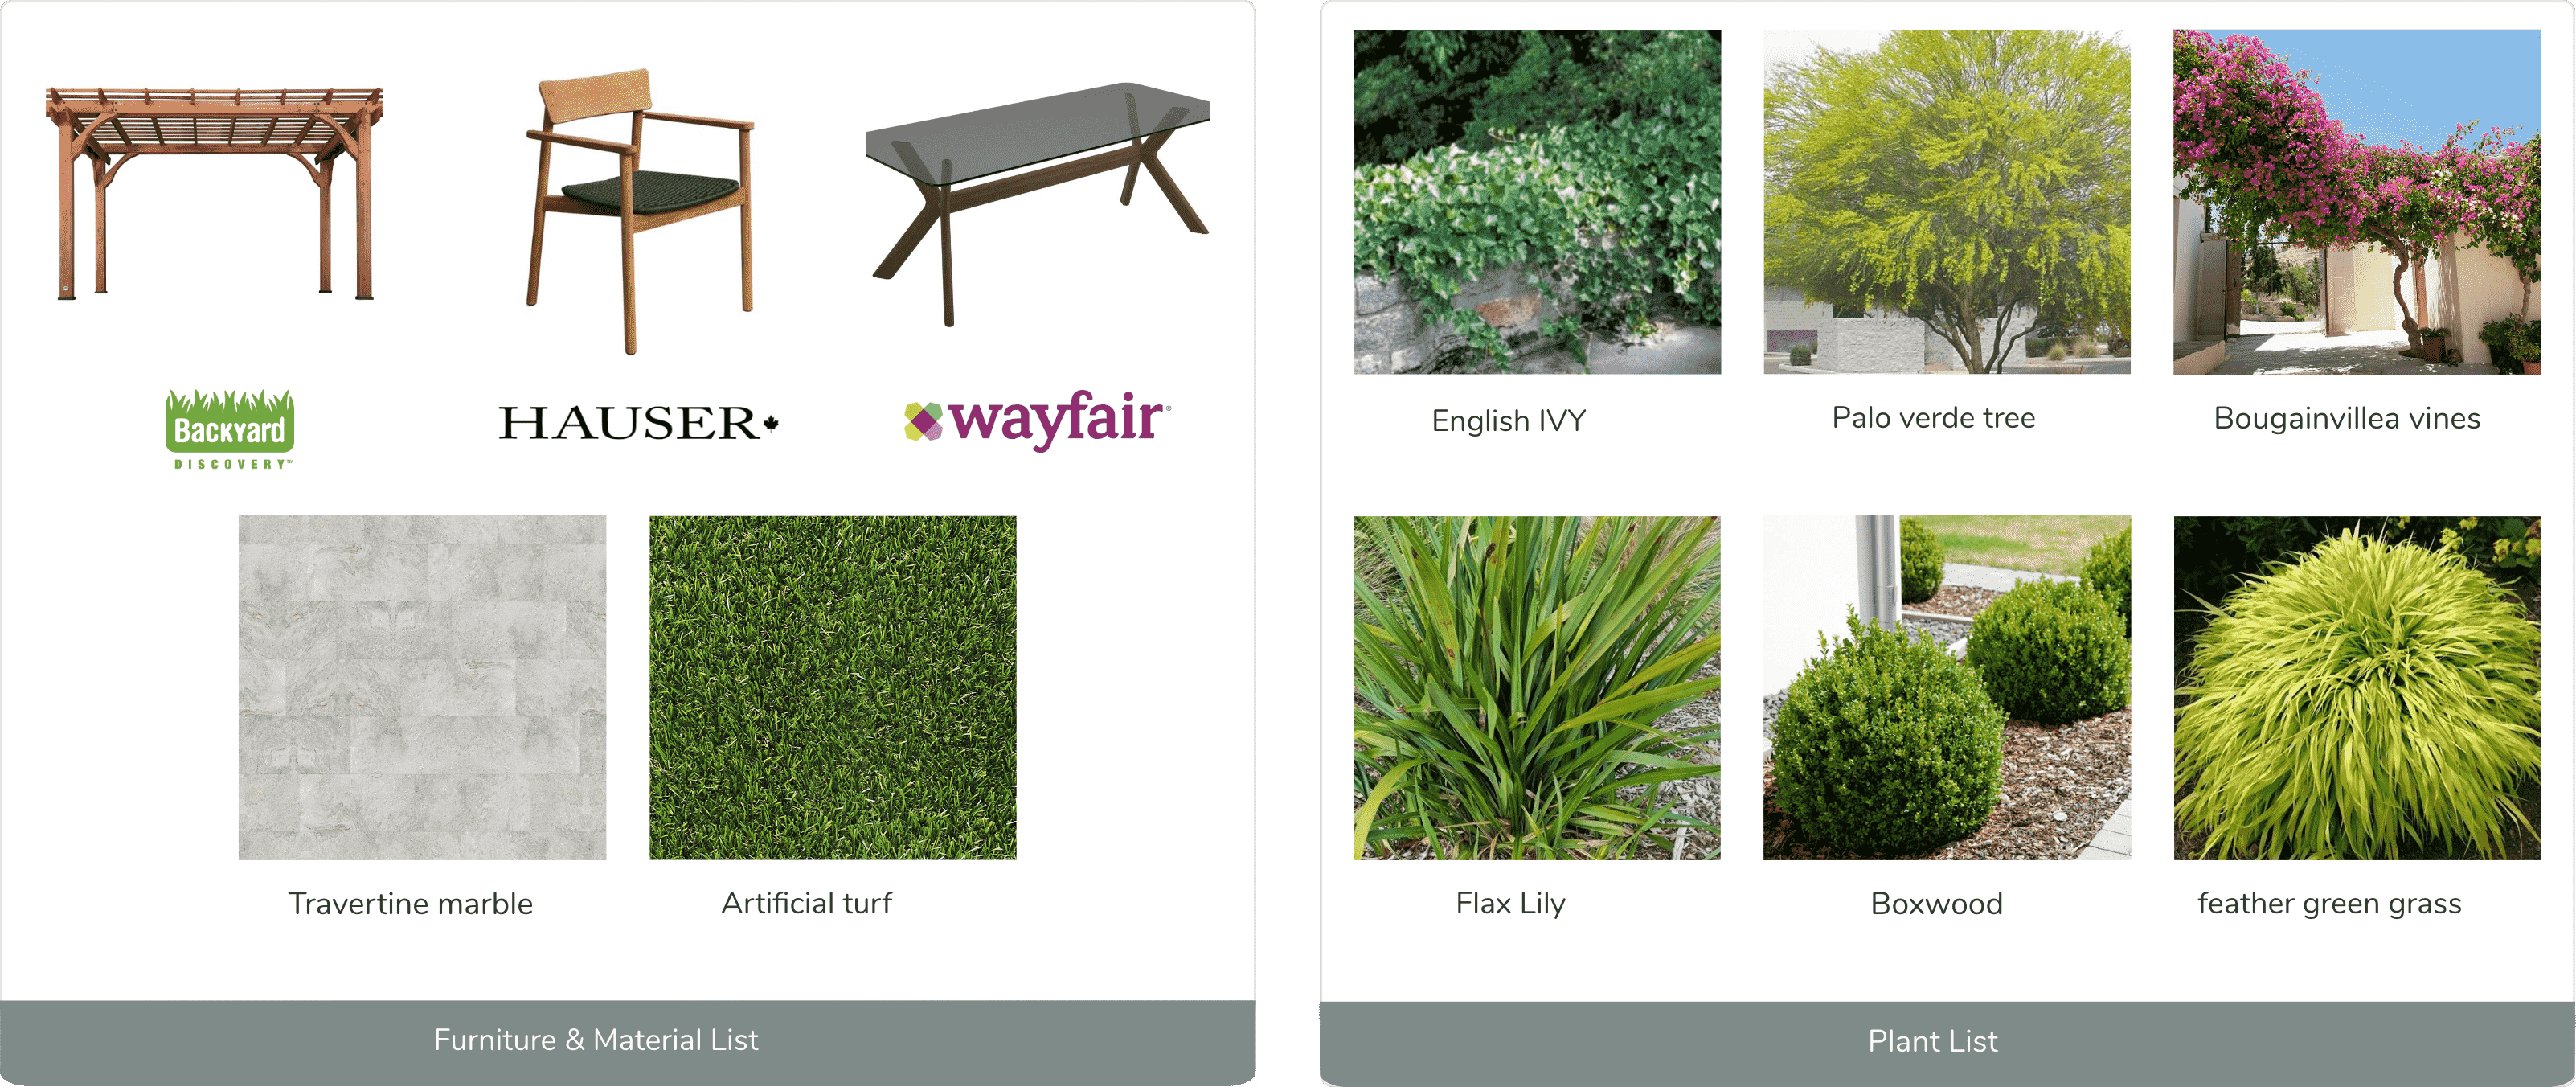 A selection of outdoor furniture and garden plants, including chairs, tables, and diverse flora like Anise Hyssop and Sarastro Bellflower